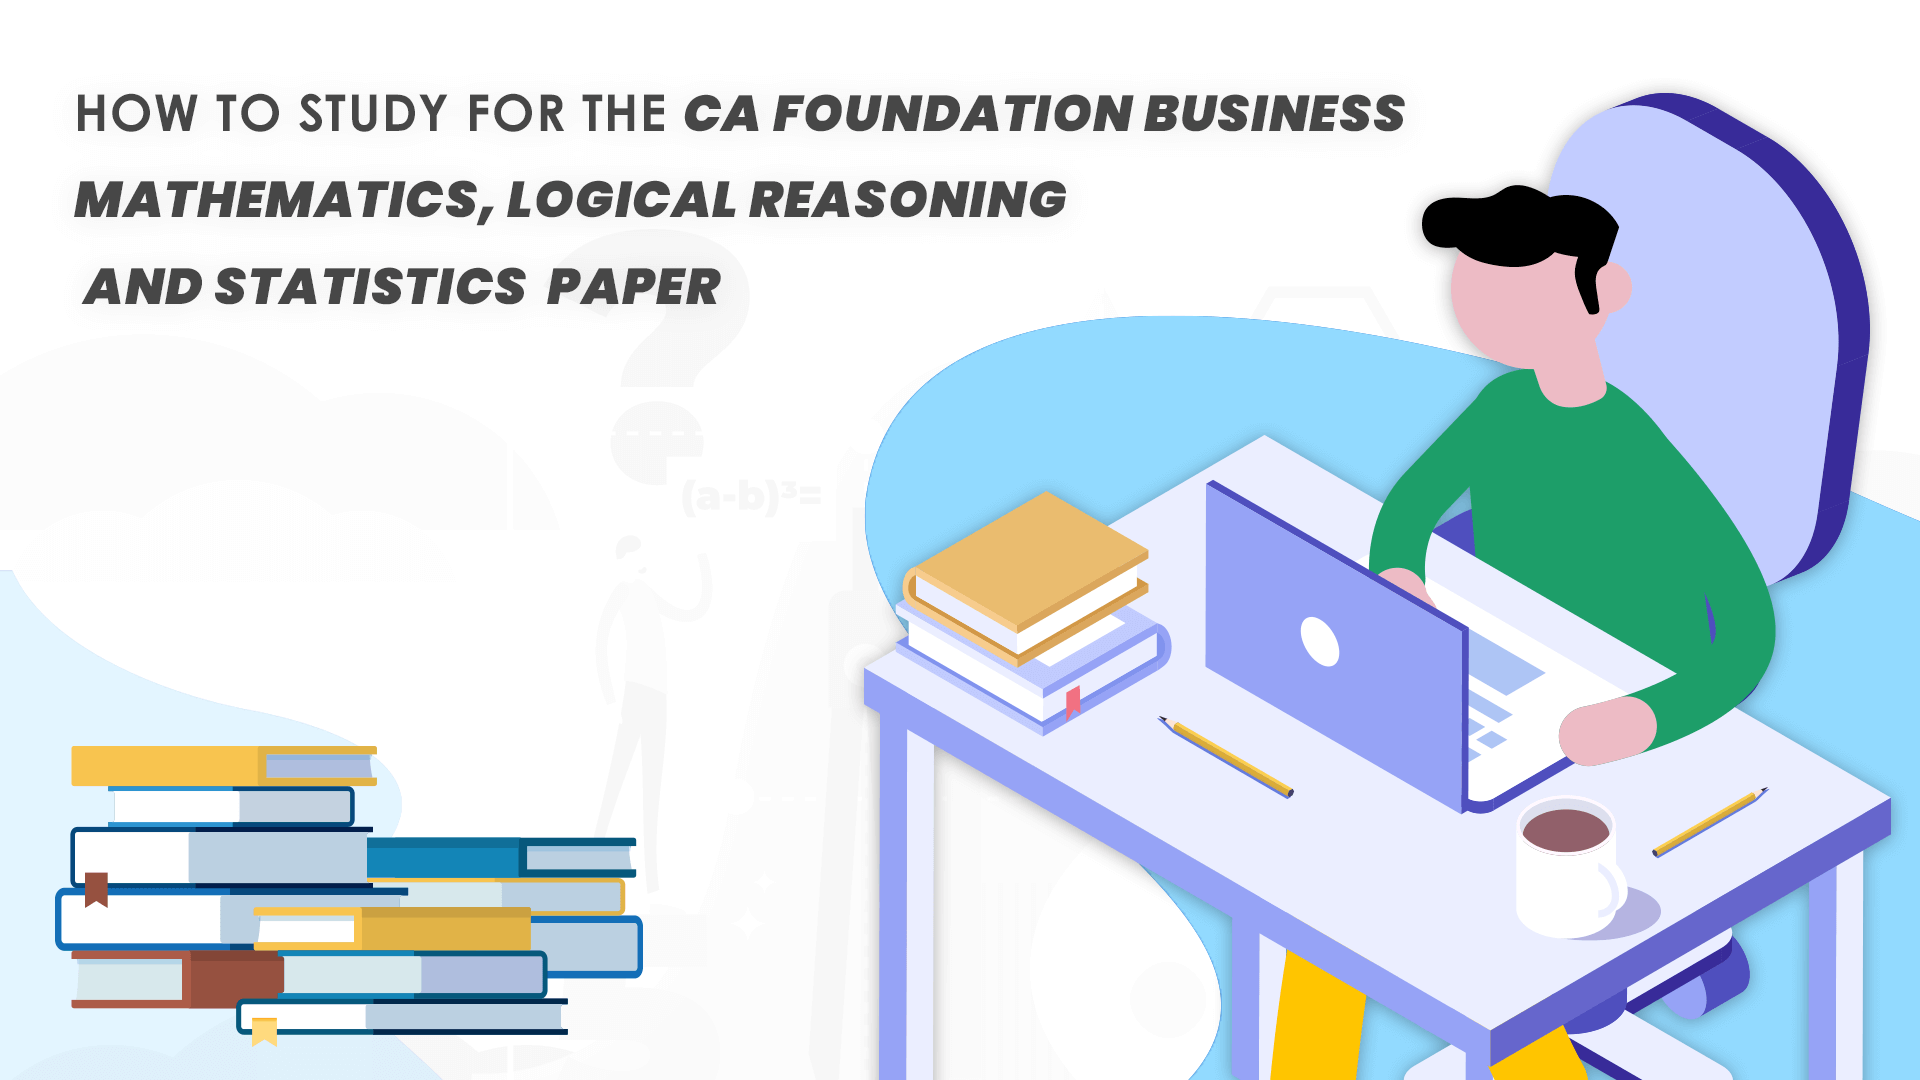 How to Study for the CA Foundation Business Mathematics, Logical Reasoning and Statistics Paper